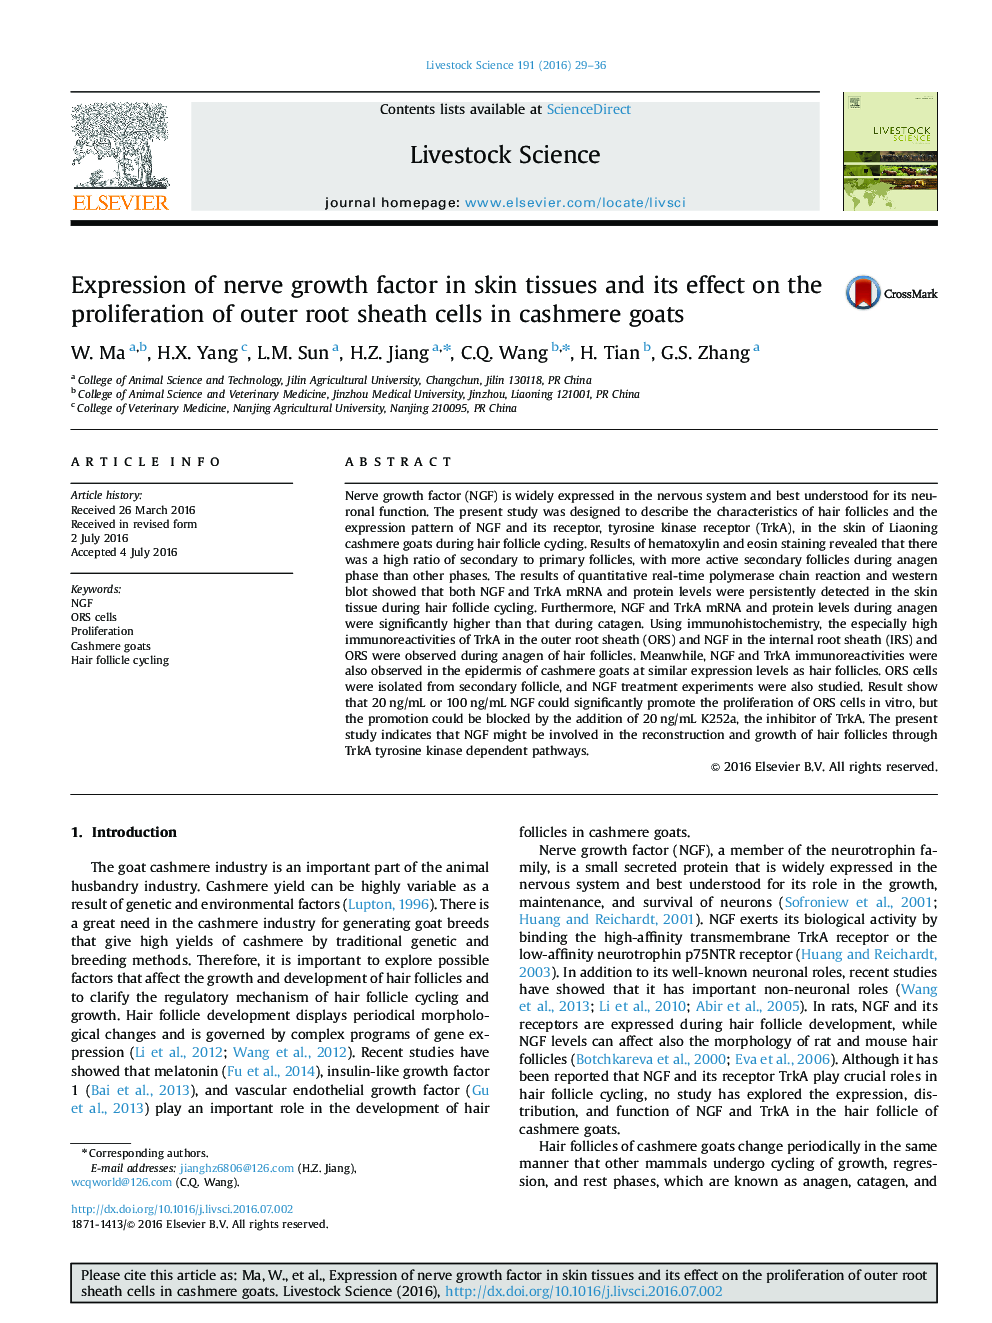 Expression of nerve growth factor in skin tissues and its effect on the proliferation of outer root sheath cells in cashmere goats